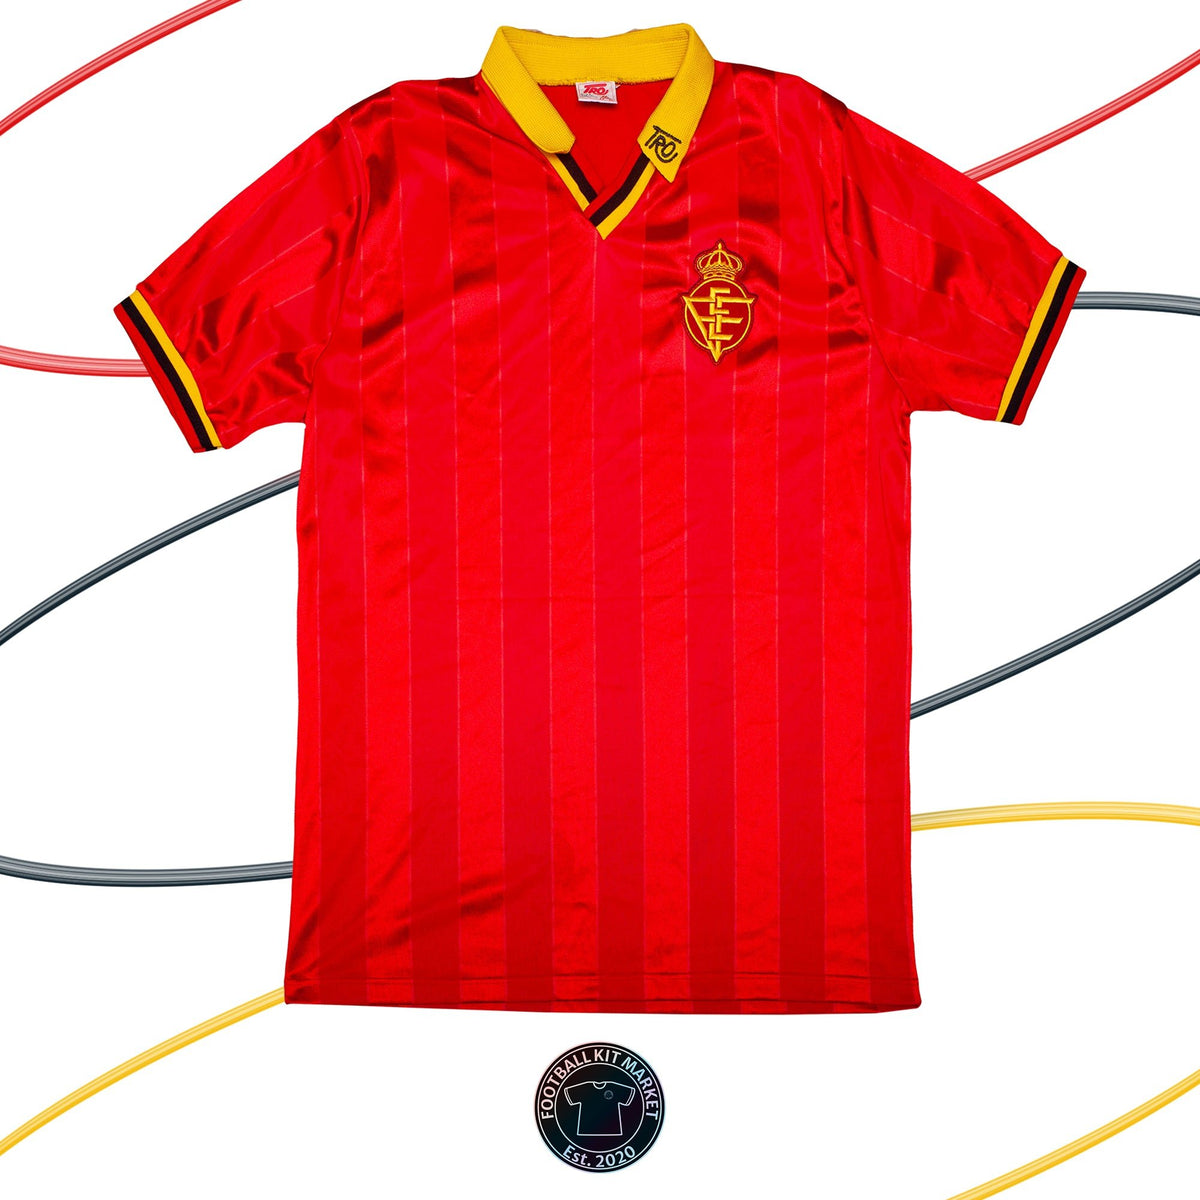 Genuine SPAIN Home Shirt (1982) - TRO (L) - Product Image from Football Kit Market